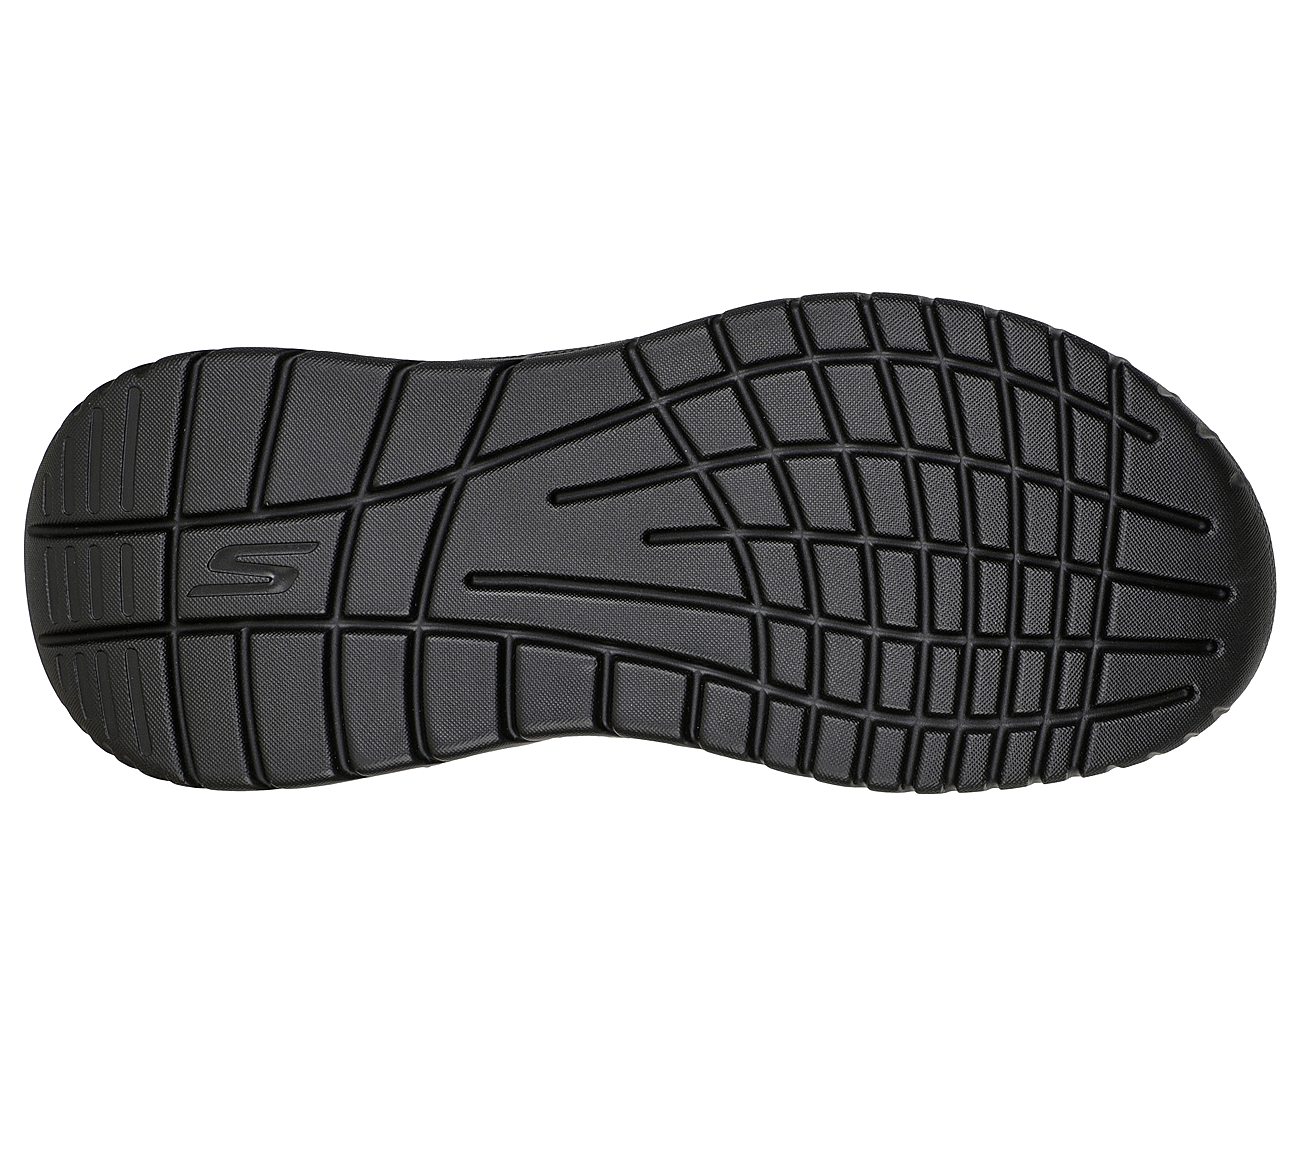 GO RECOVER SANDAL, BBLACK Footwear Bottom View